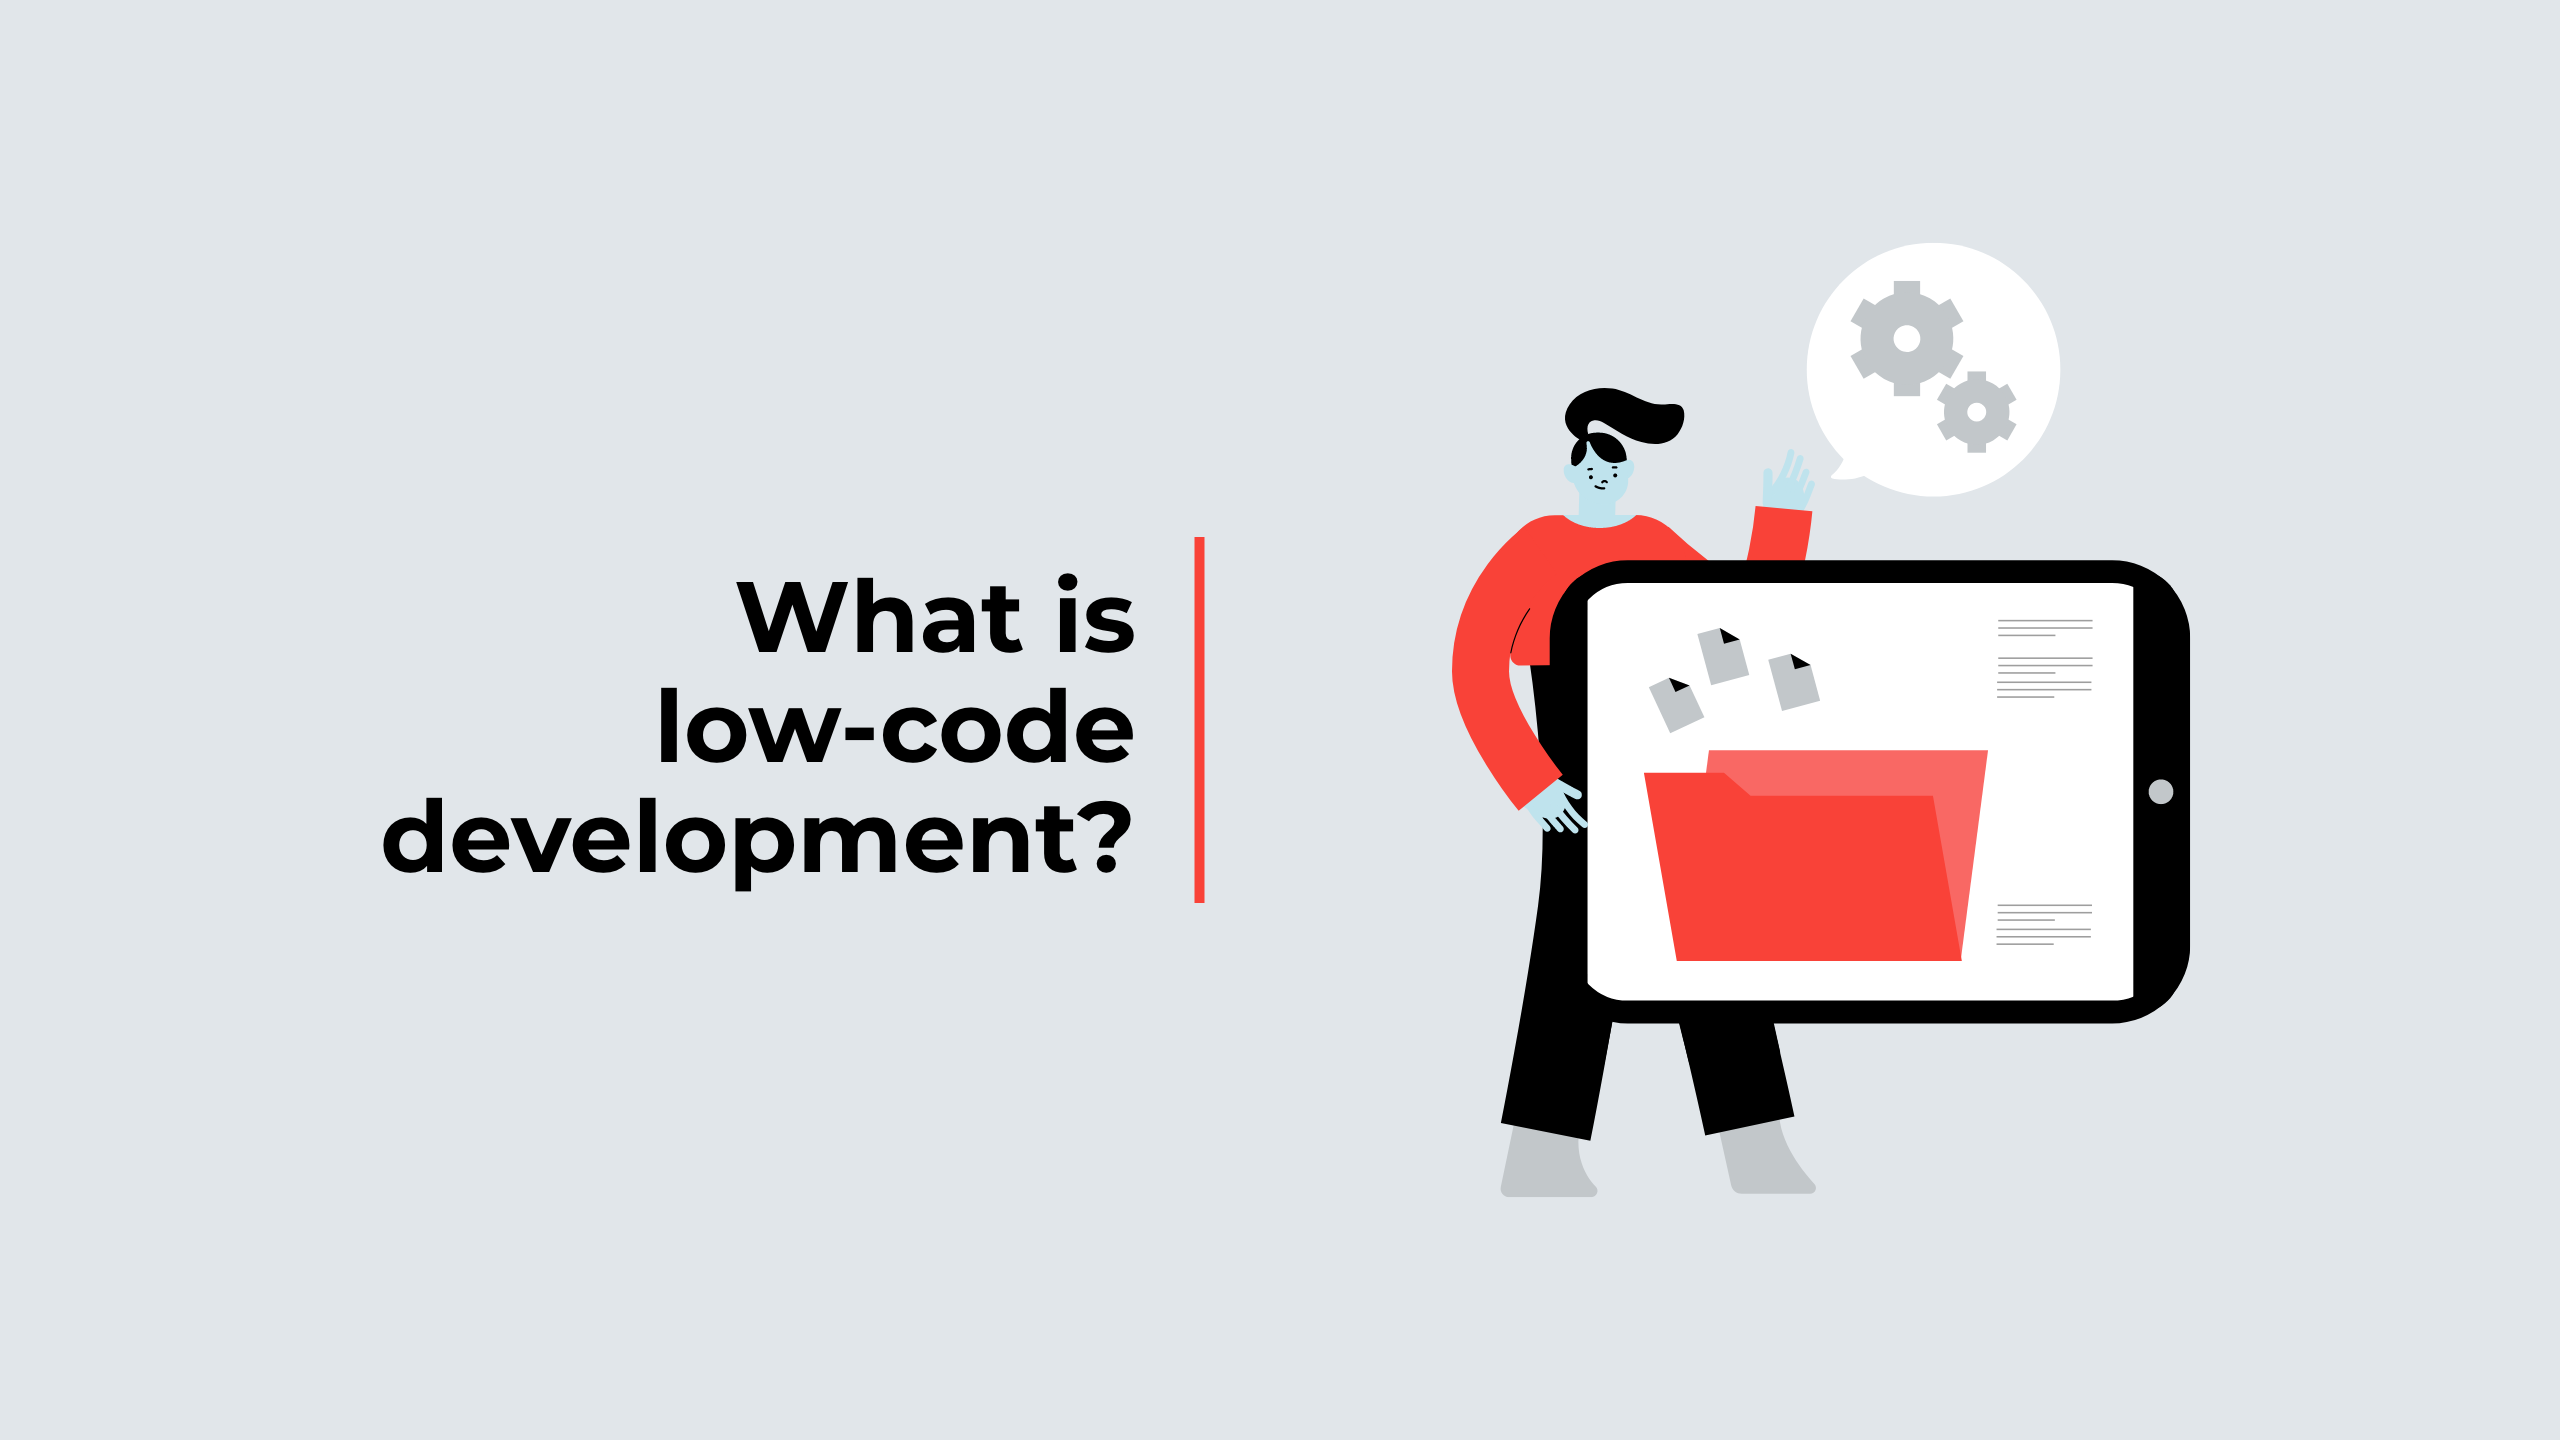 What is low-code development?